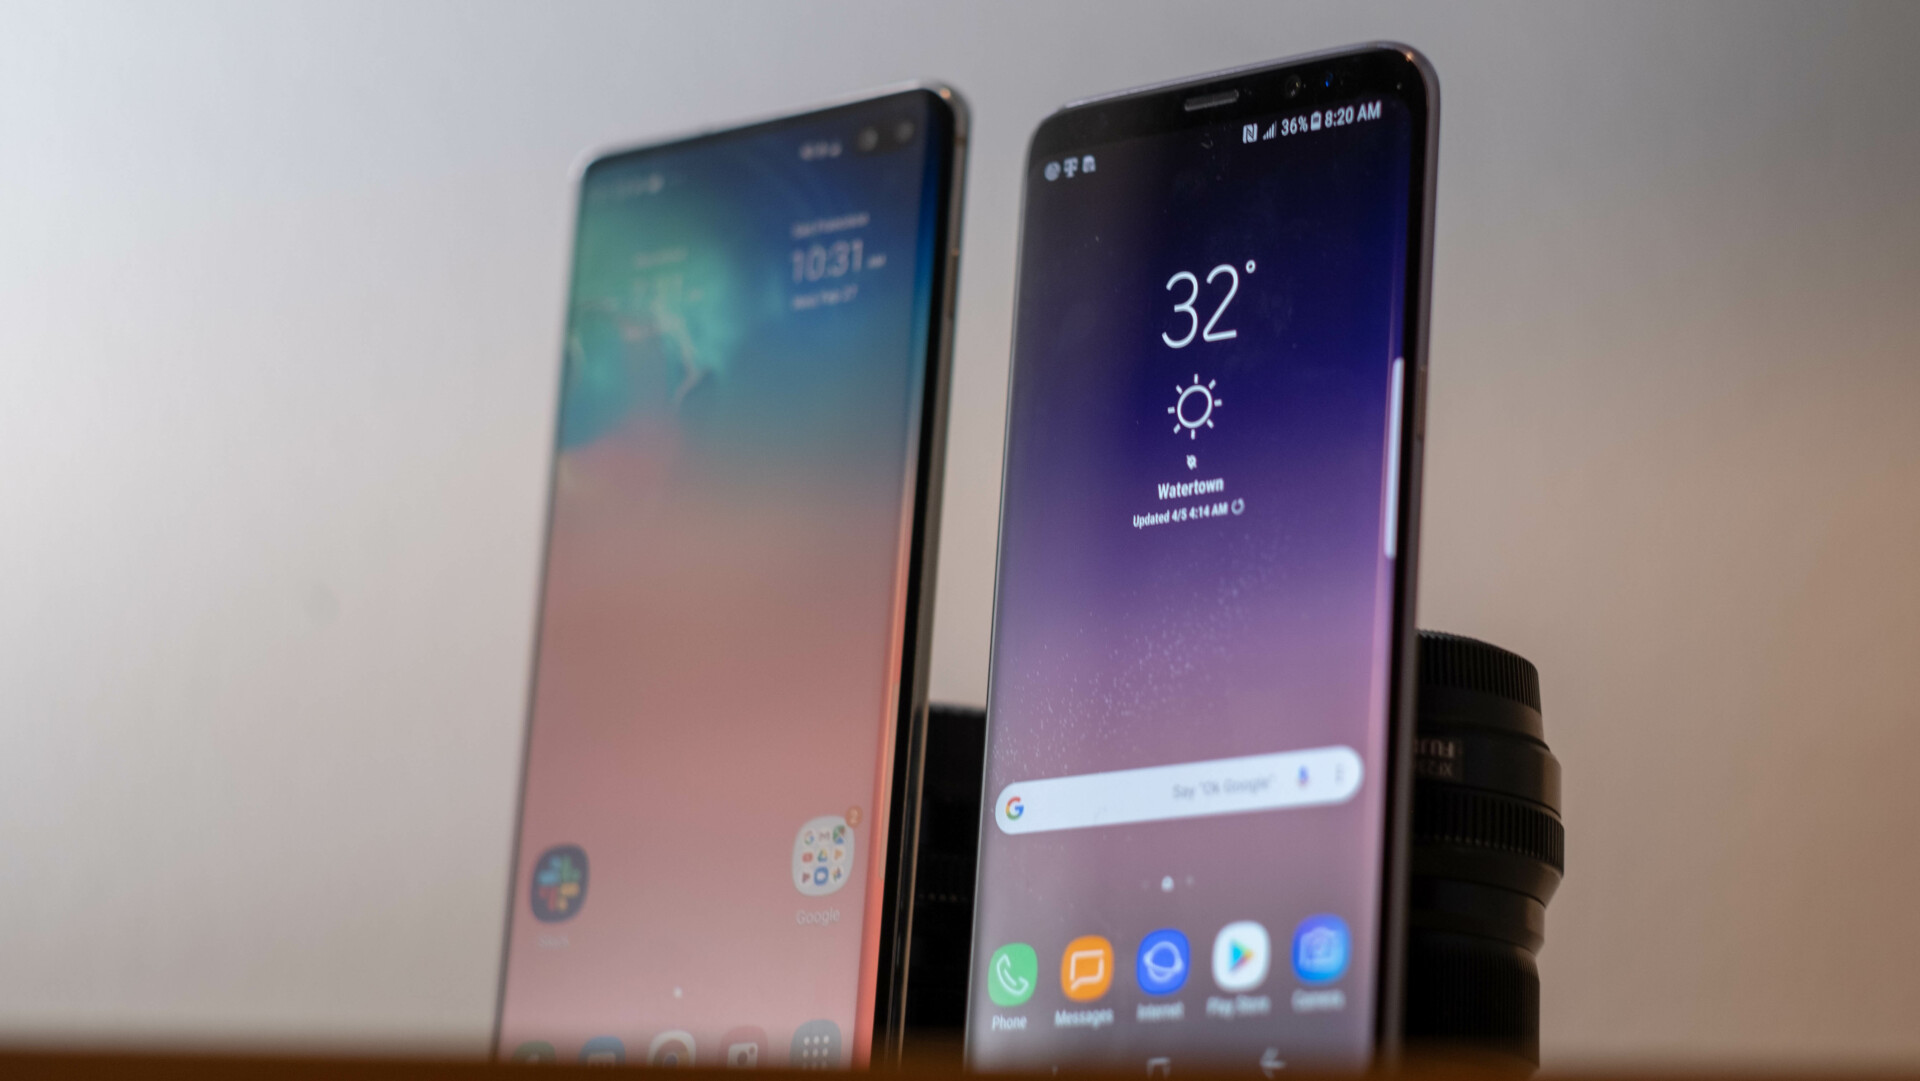 A Samsung Galaxy S10 Plus next to a Samsung Galaxy S8 showing both screens.